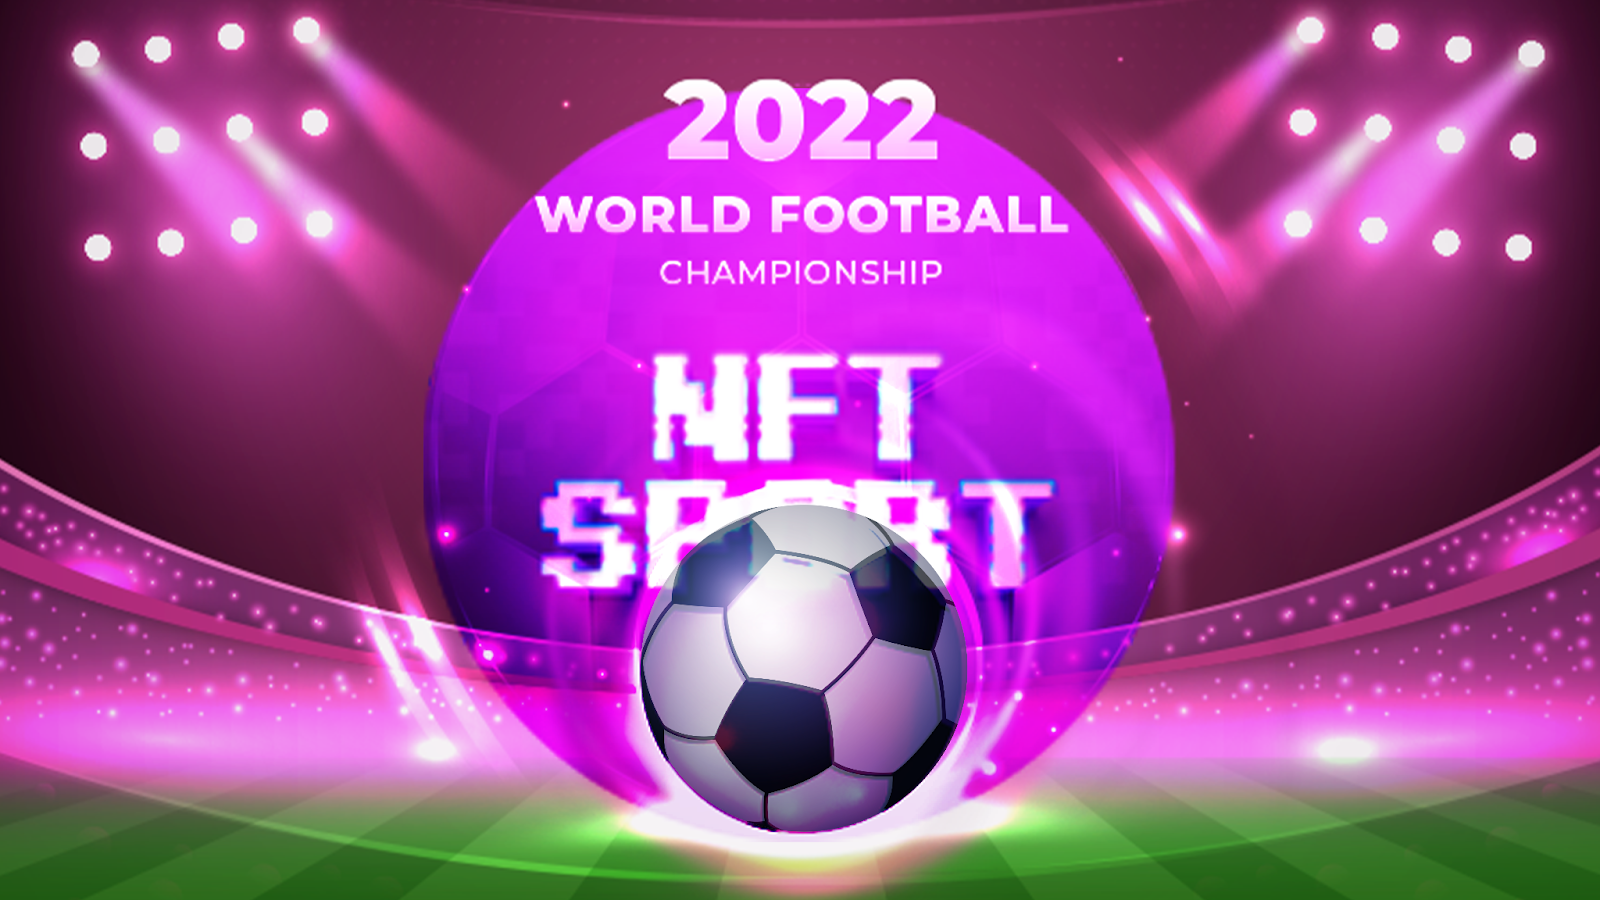 NFT Sport, Wednesday, November 16, 2022, Press release picture